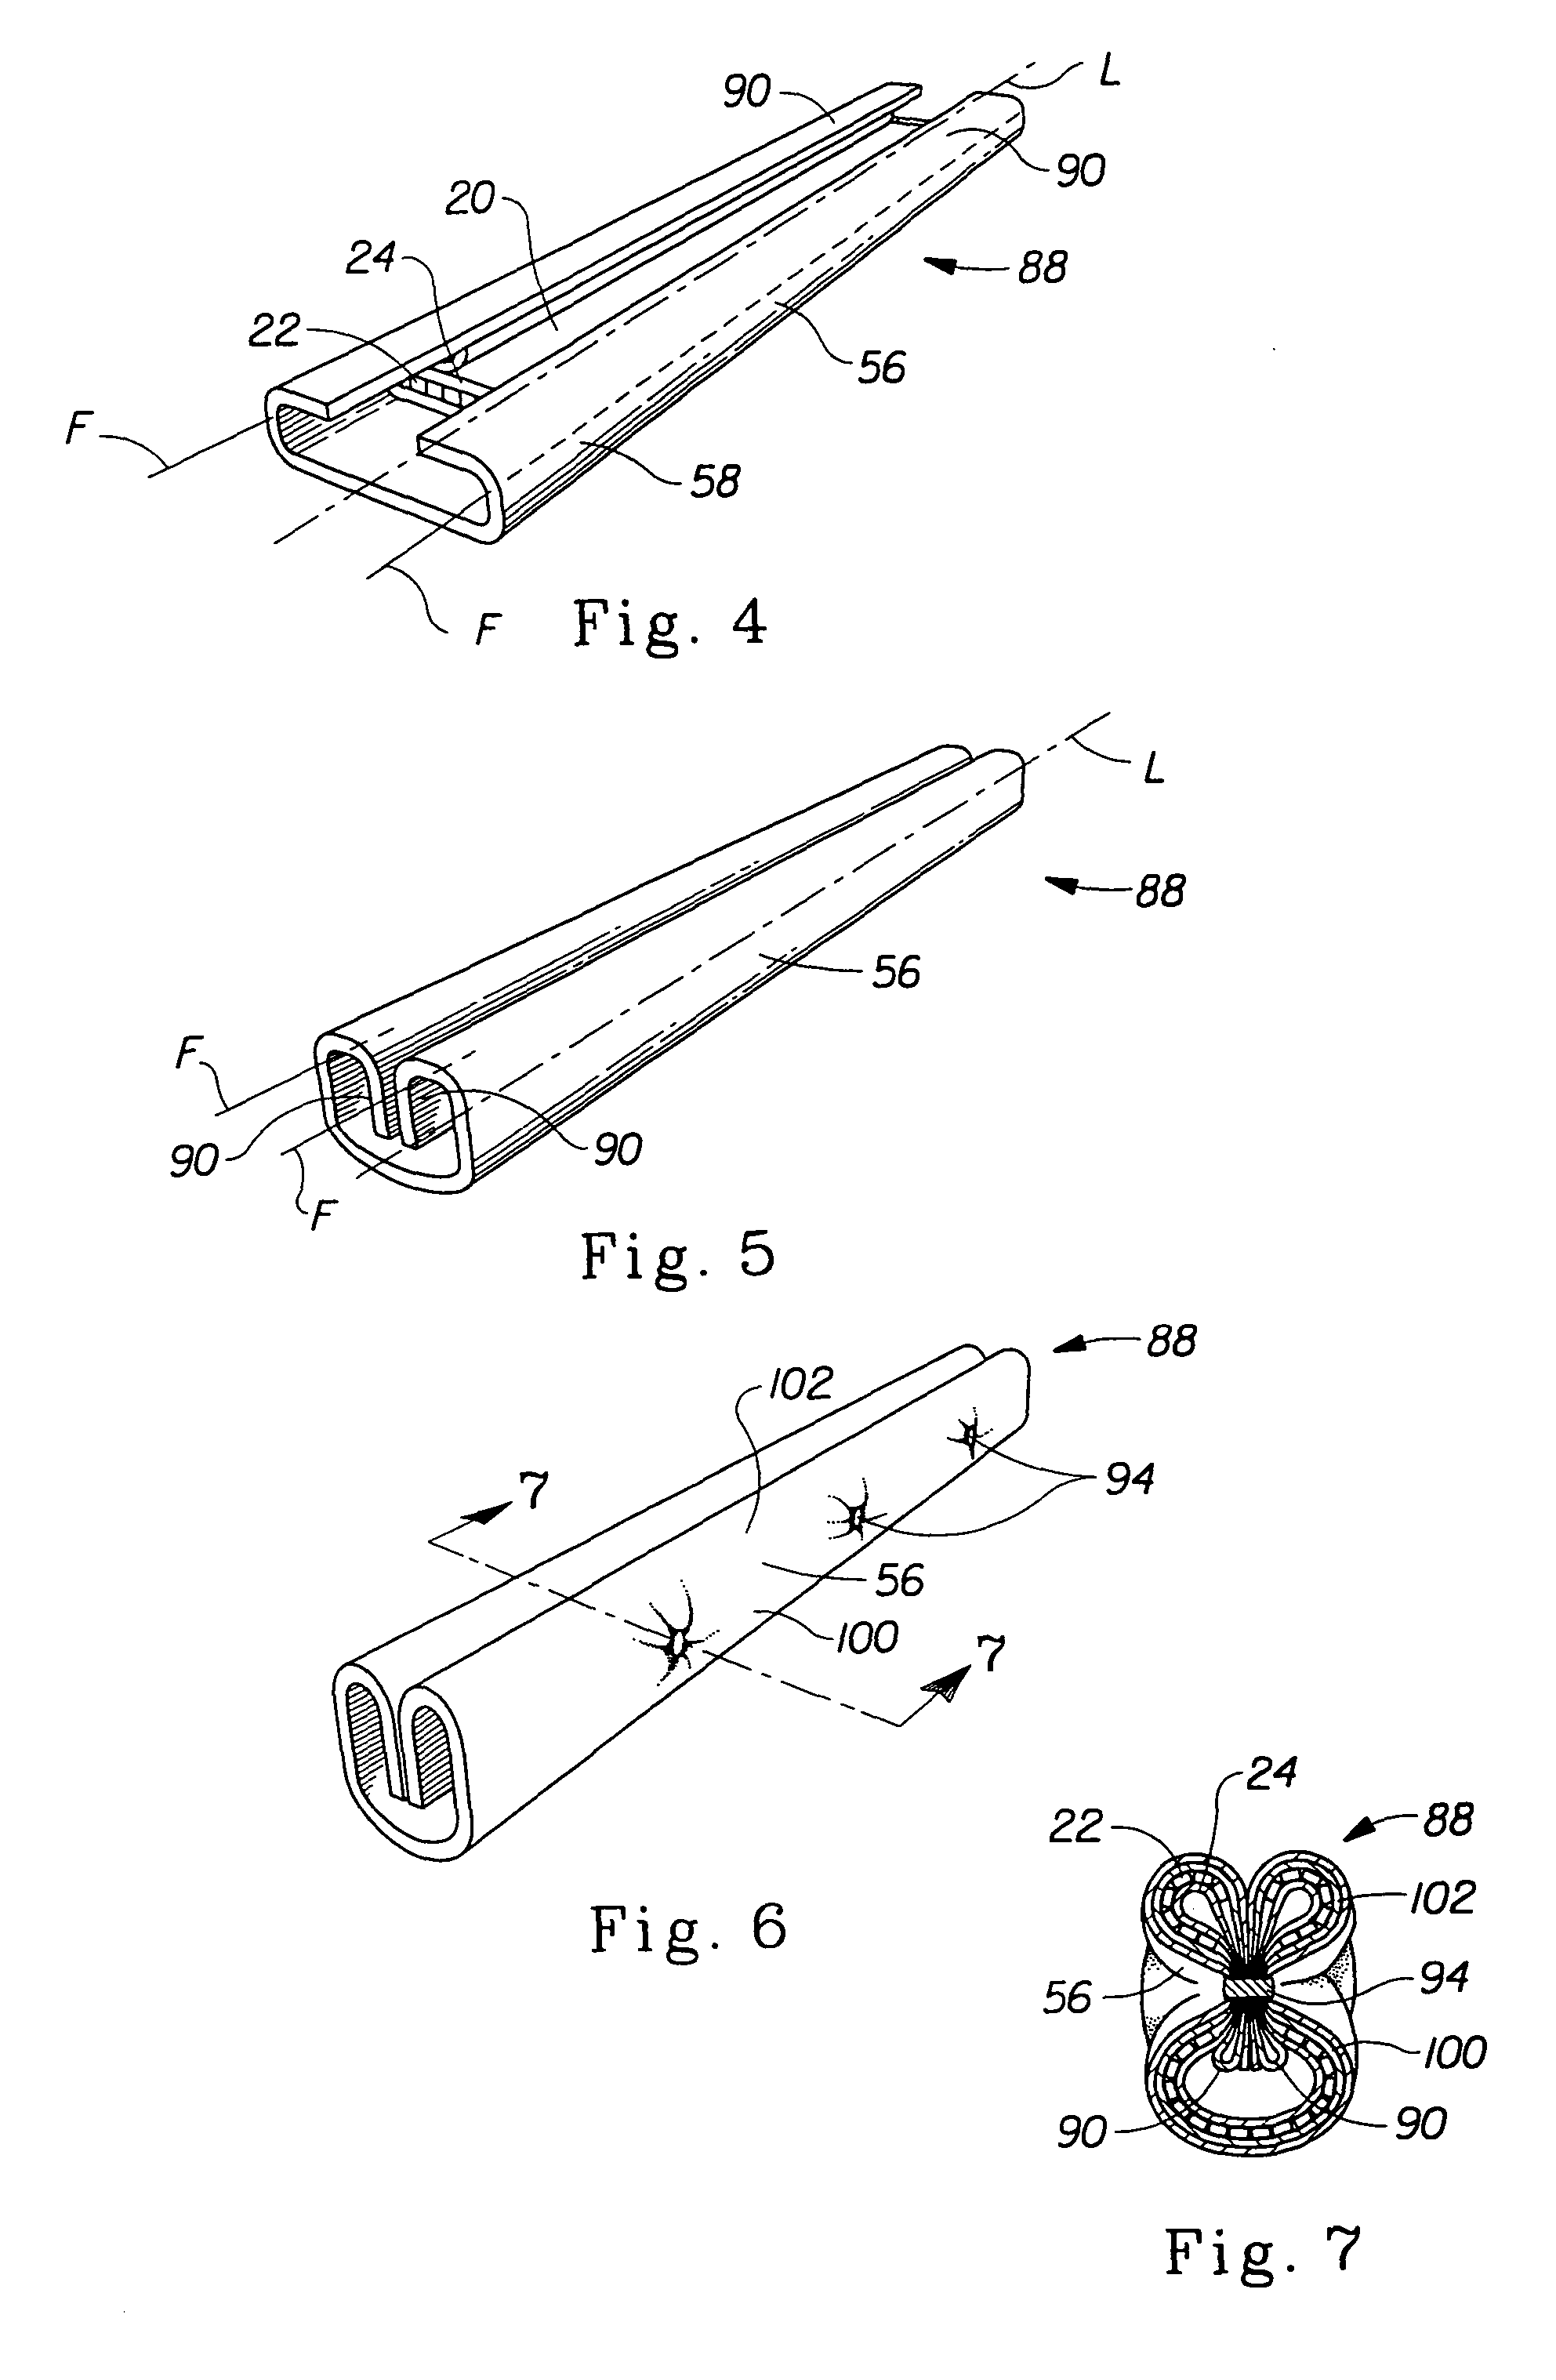 Methods of bonding materials, especially materials used in absorbent articles